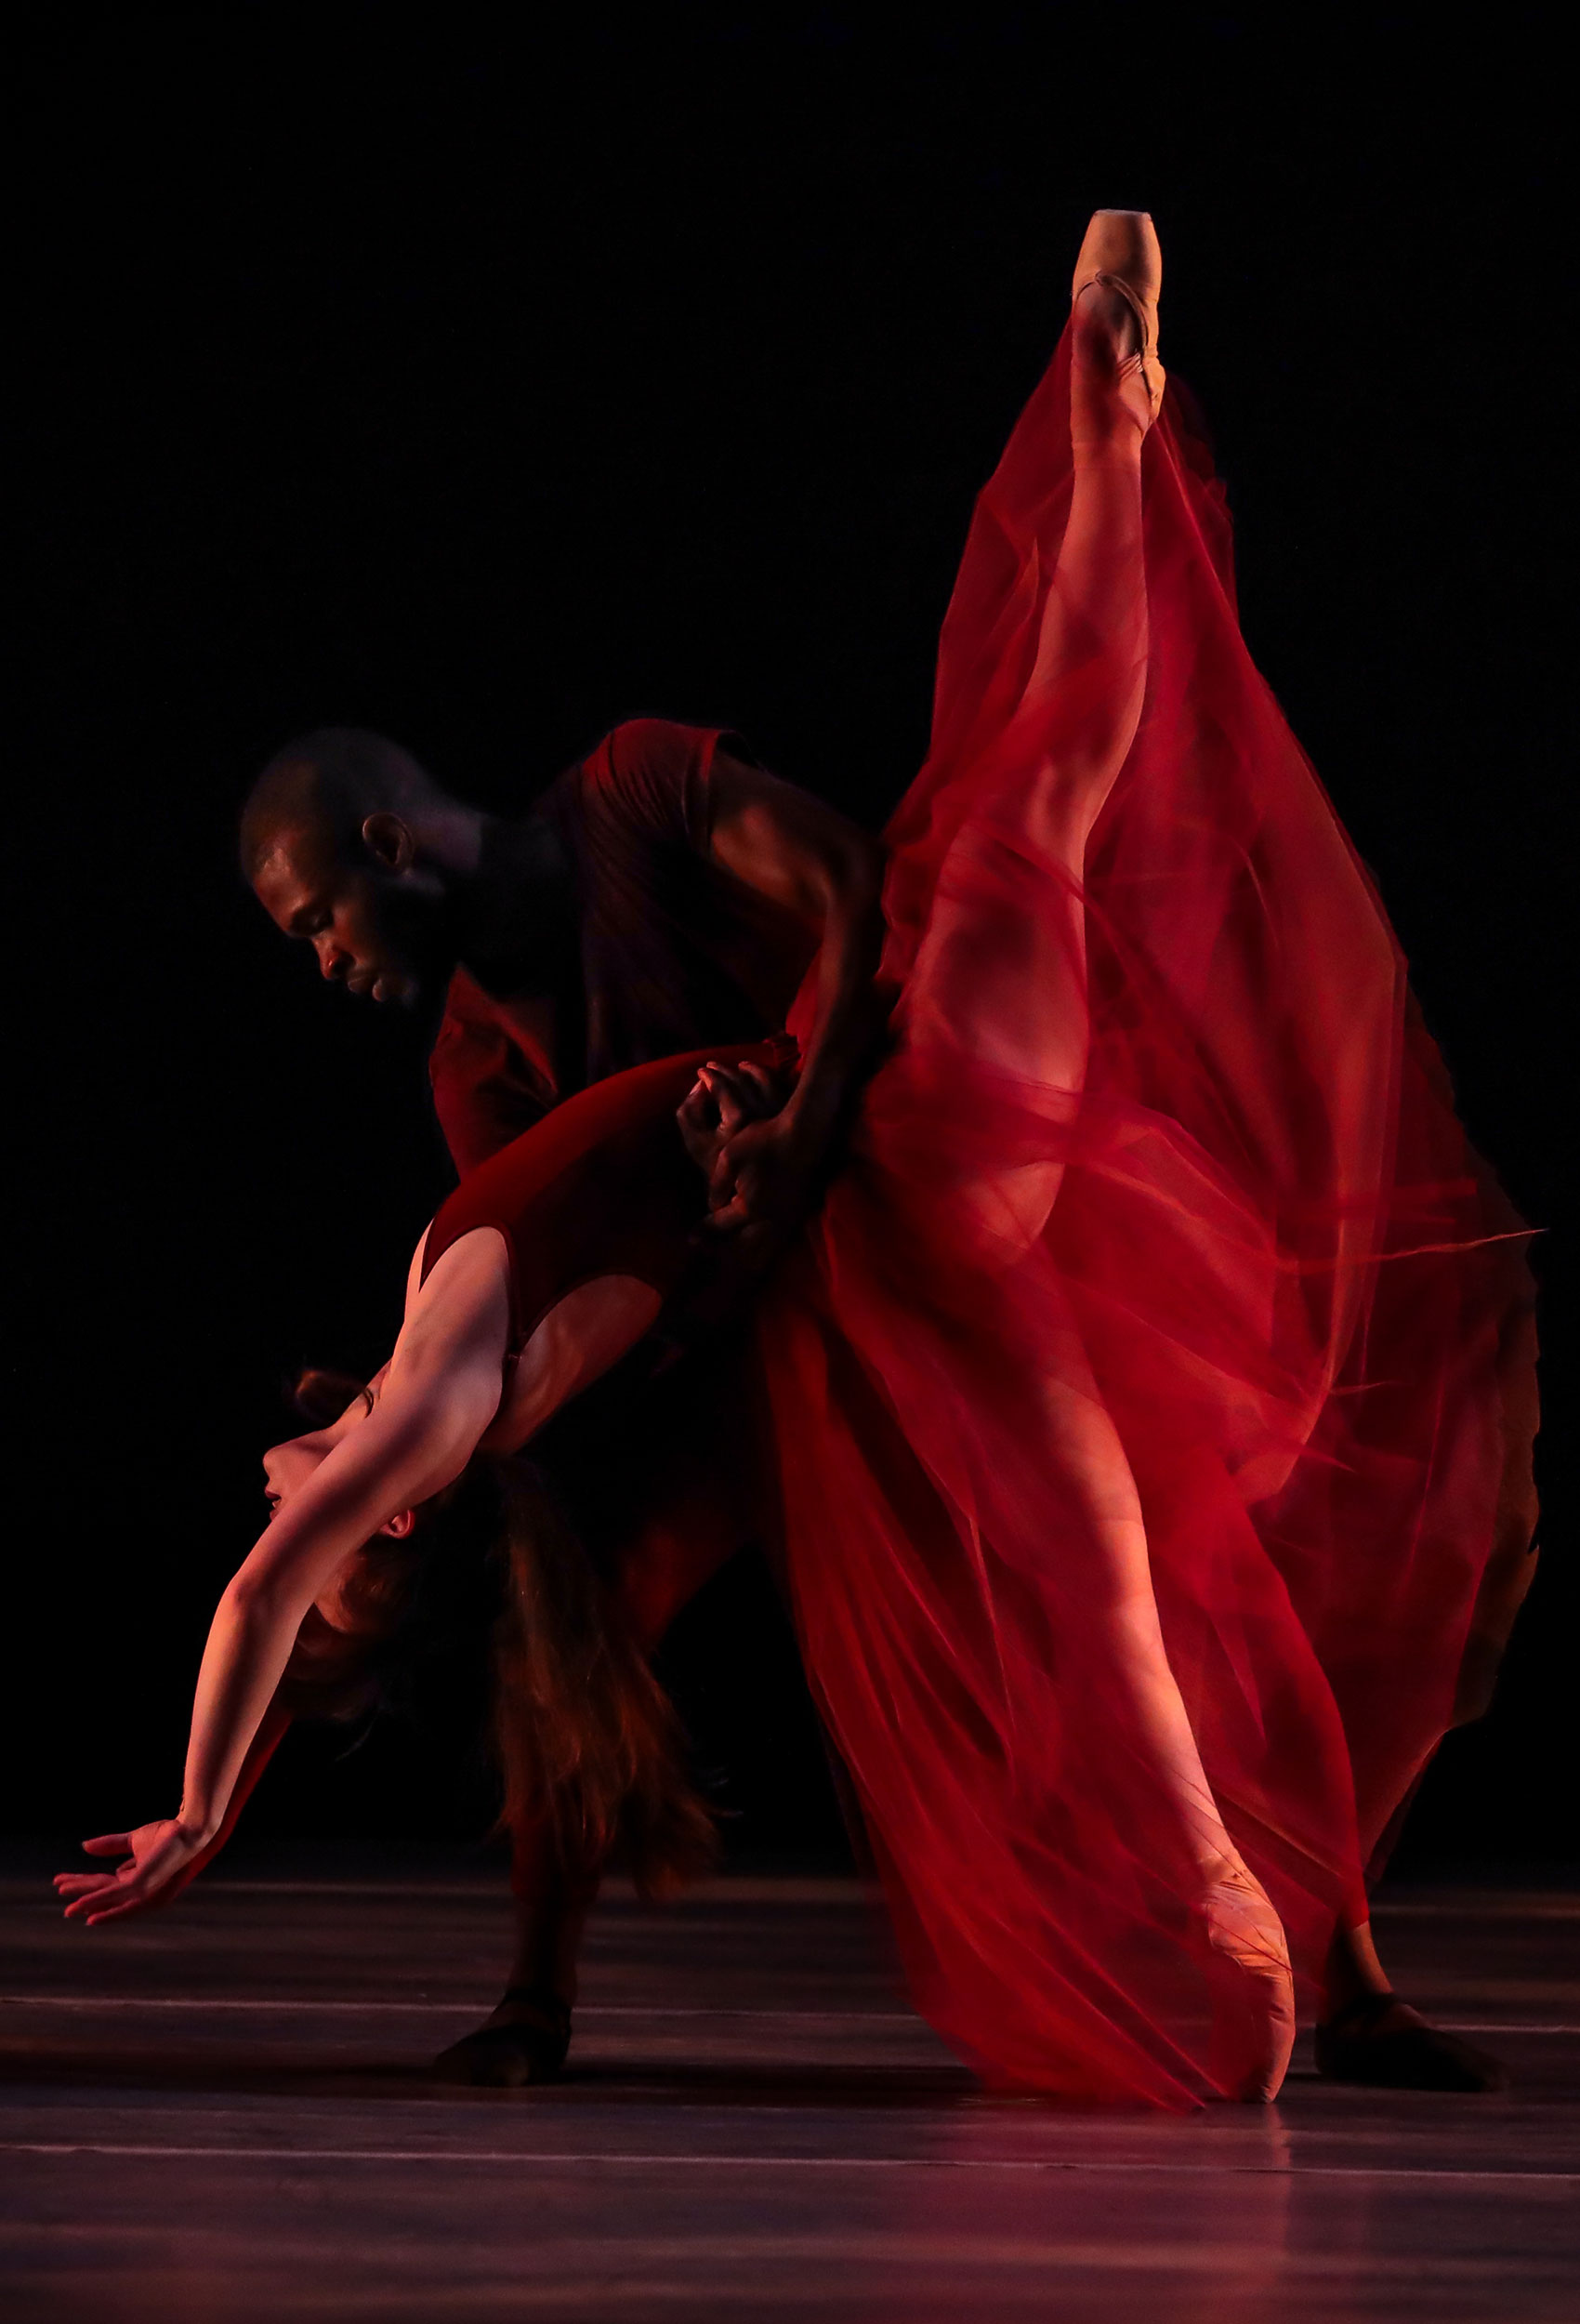 A Black male dancer holds a female dancer in his arms. He leans forward, holding her as she extends her arms gracefully backwards toward the floor and extends one leg straight upwards. 